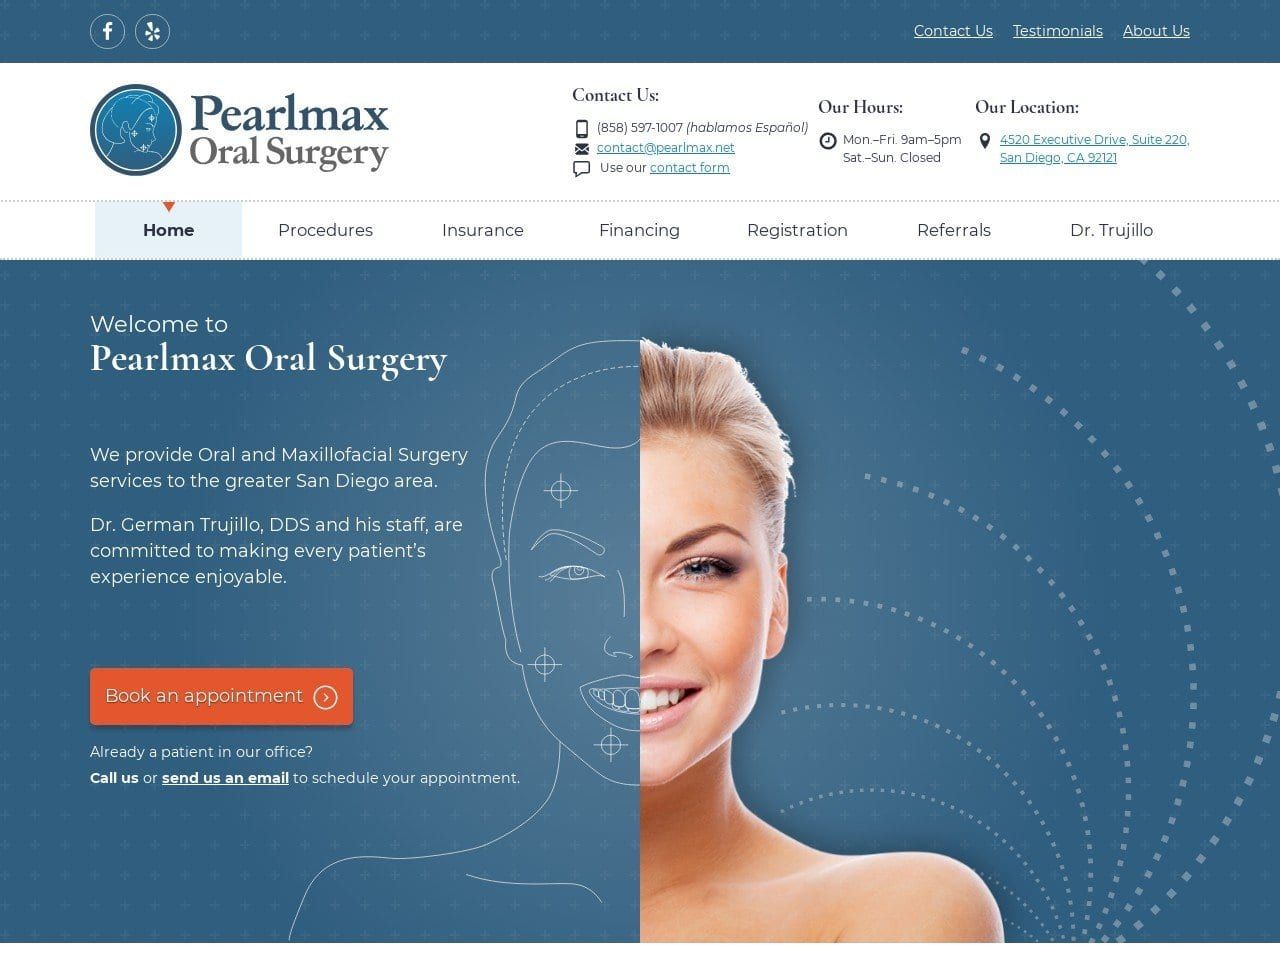 Pearlmax Oral Surgery Website Screenshot from pearlmax.net